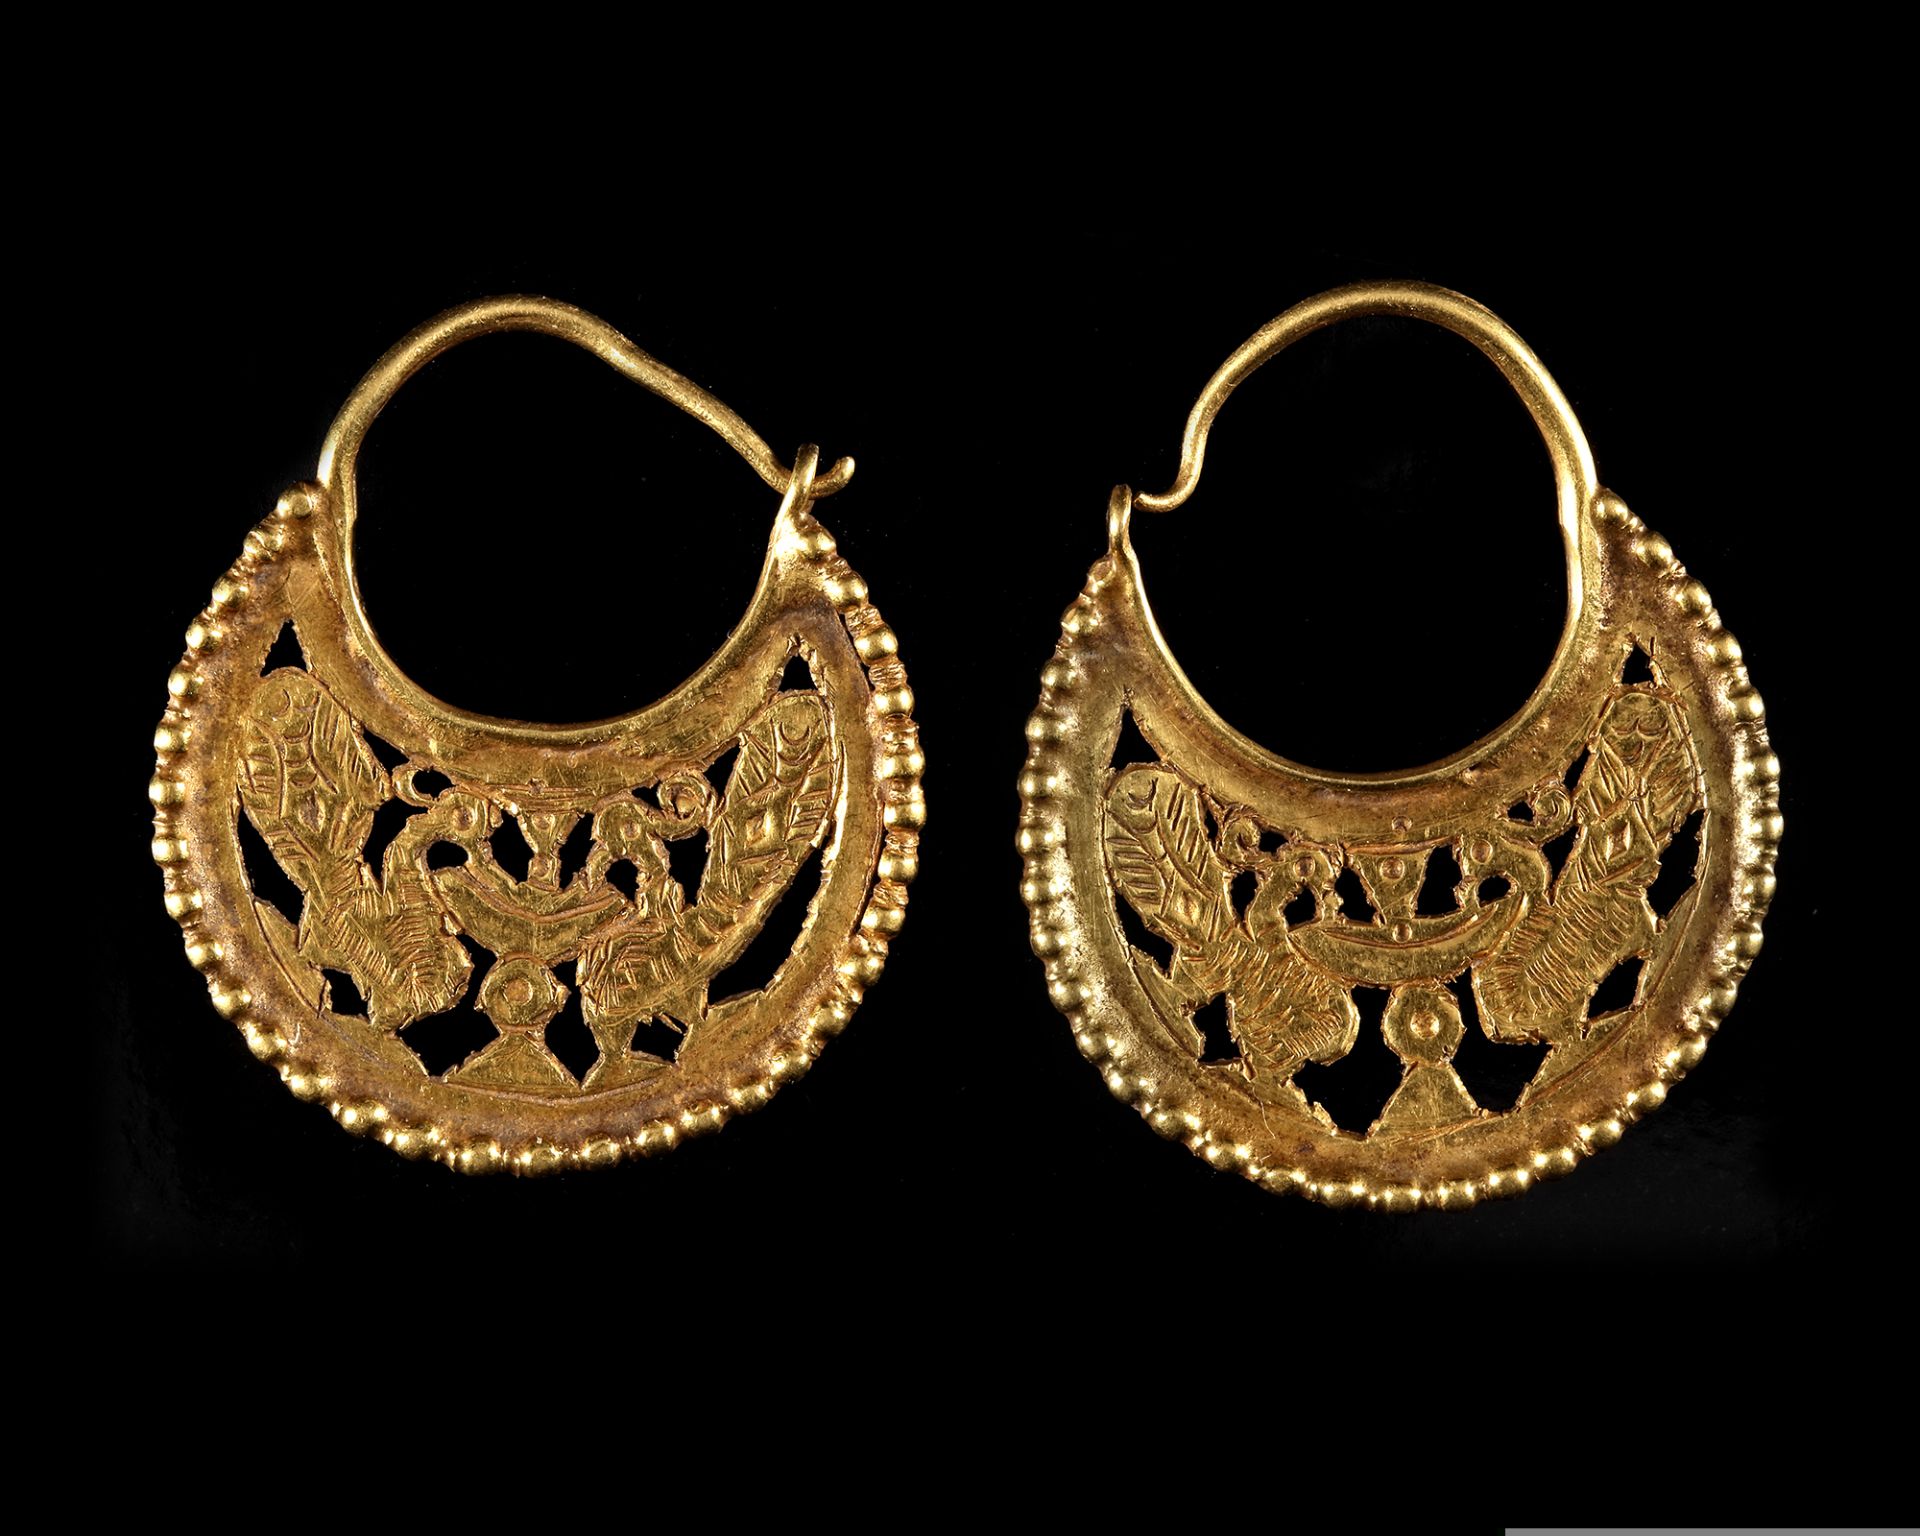 A PAIR OF FATIMID GOLD EARRINGS, EGYPT, 11TH CENTURY